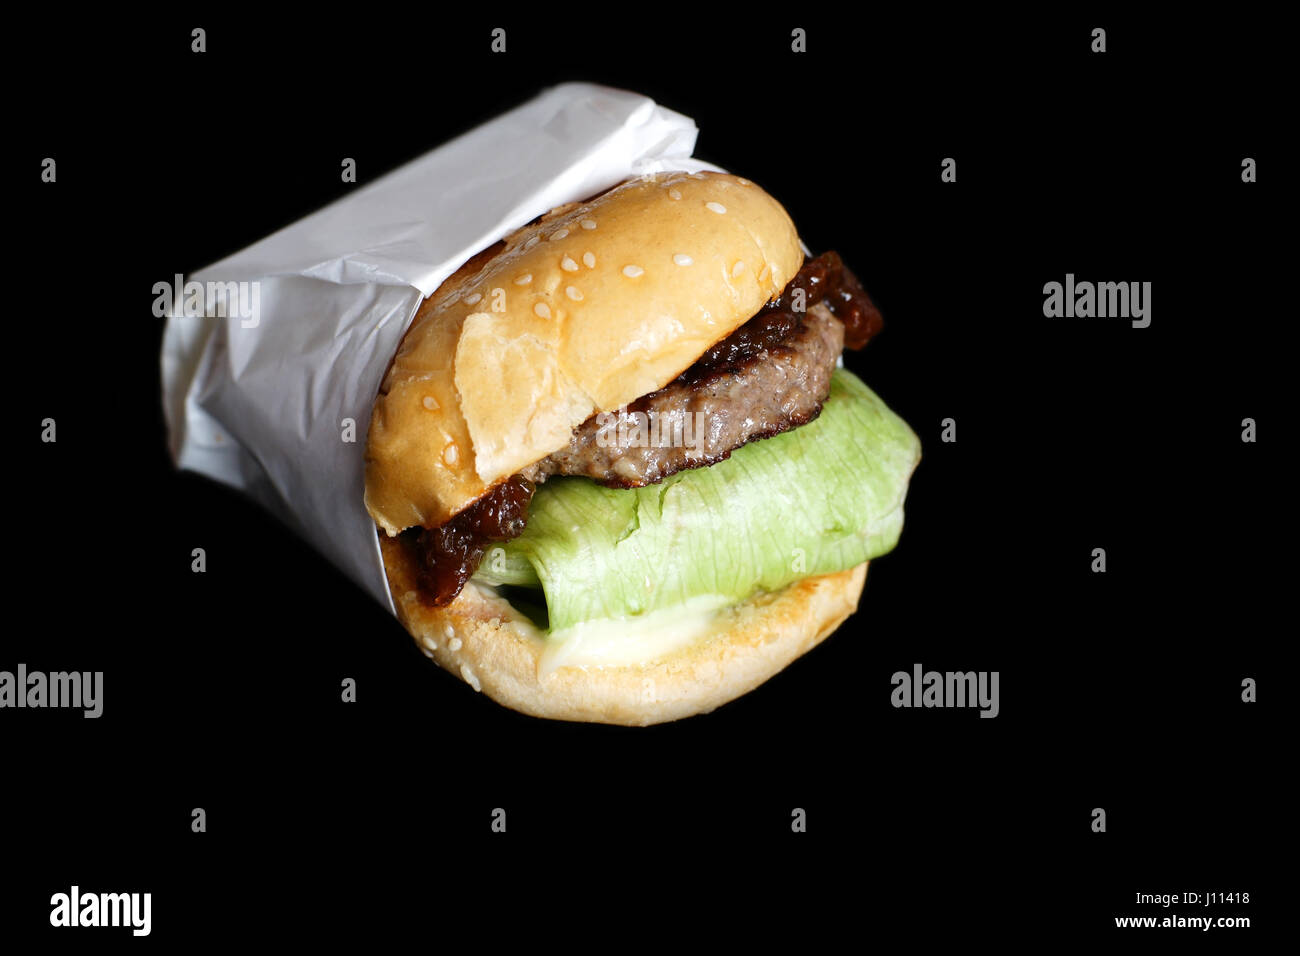 delicious hamburger american fastfood isolated on black background Stock Photo